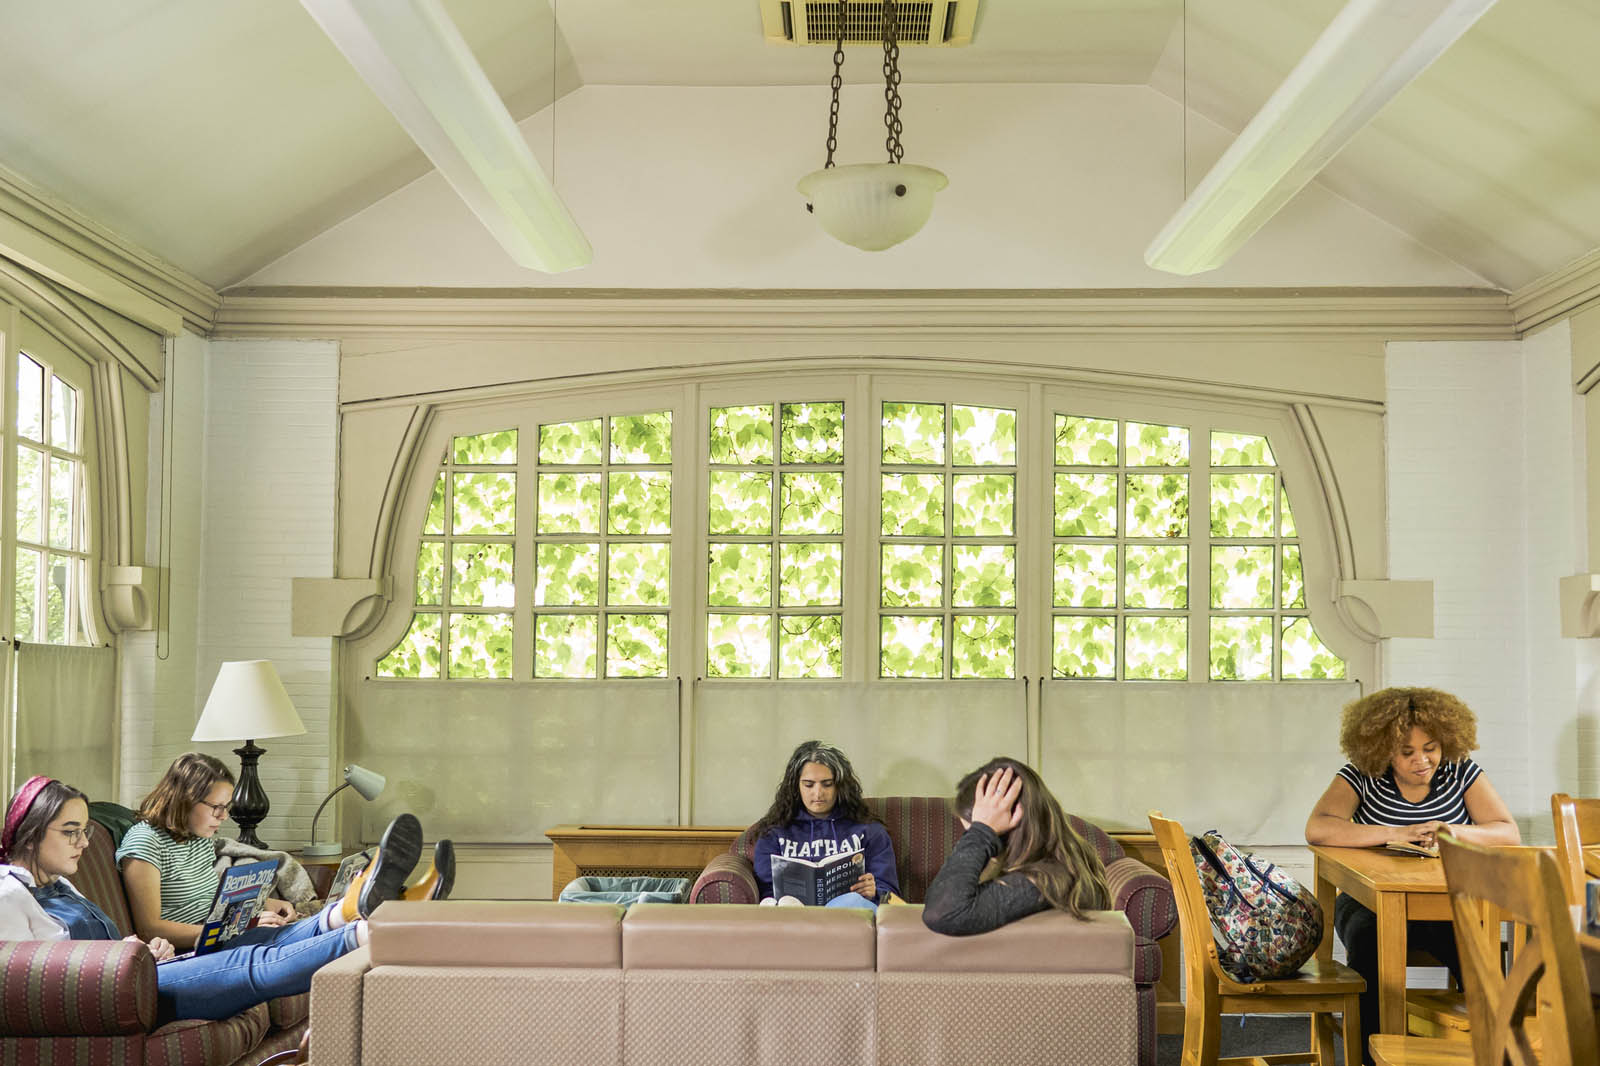 Photo of a group of Chatham University students studying inside a residence hall common room